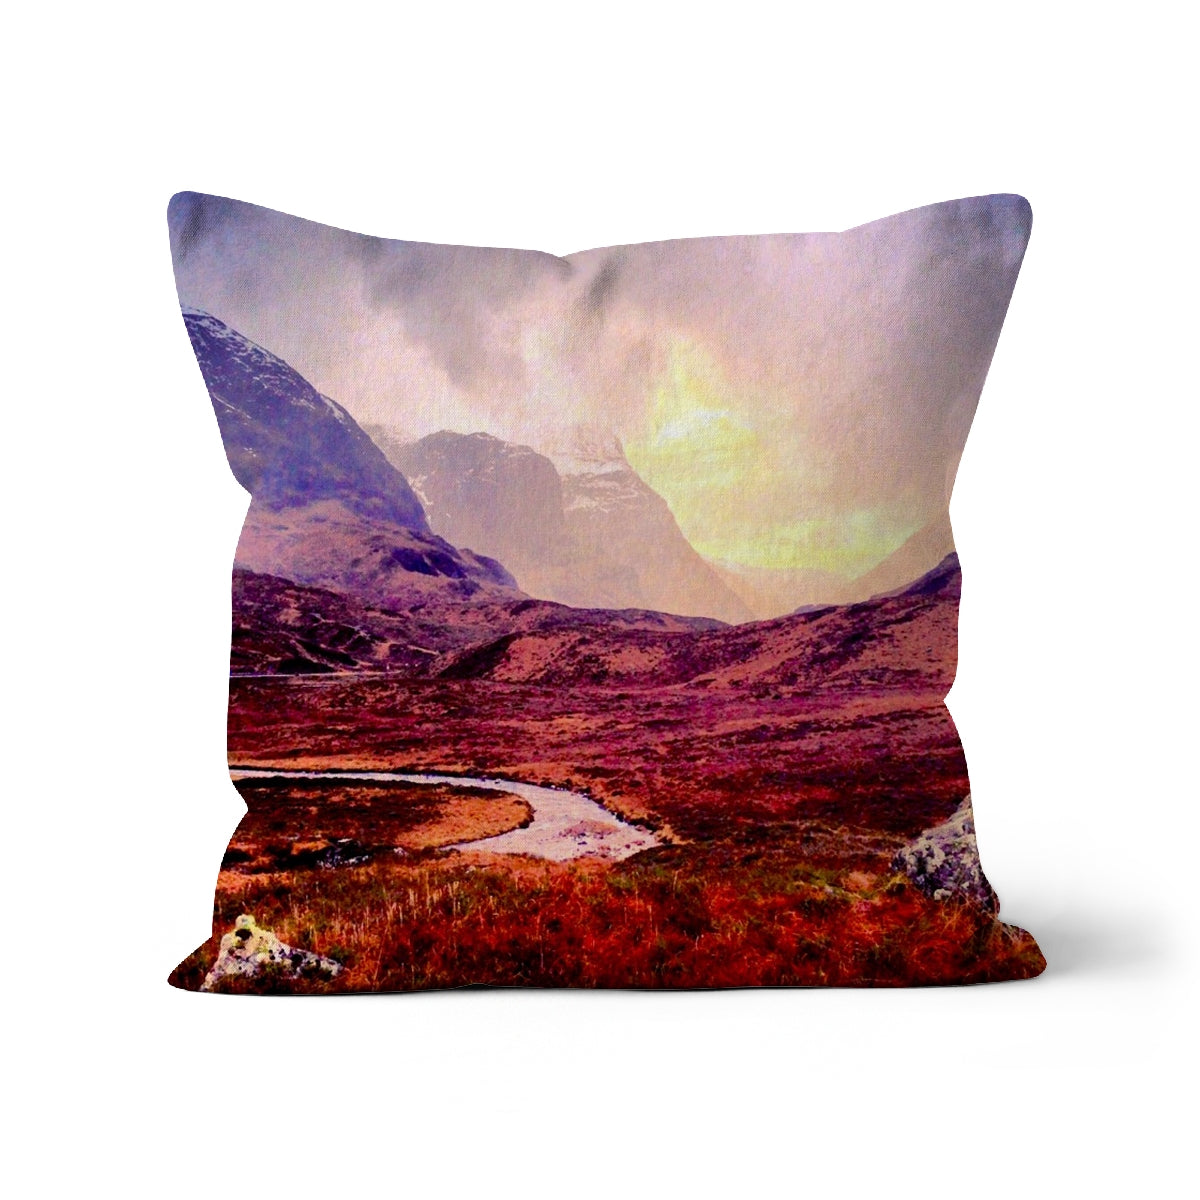 A Brooding Glencoe Art Gifts Cushion-Cushions-Glencoe Art Gallery-Faux Suede-24"x24"-Paintings, Prints, Homeware, Art Gifts From Scotland By Scottish Artist Kevin Hunter